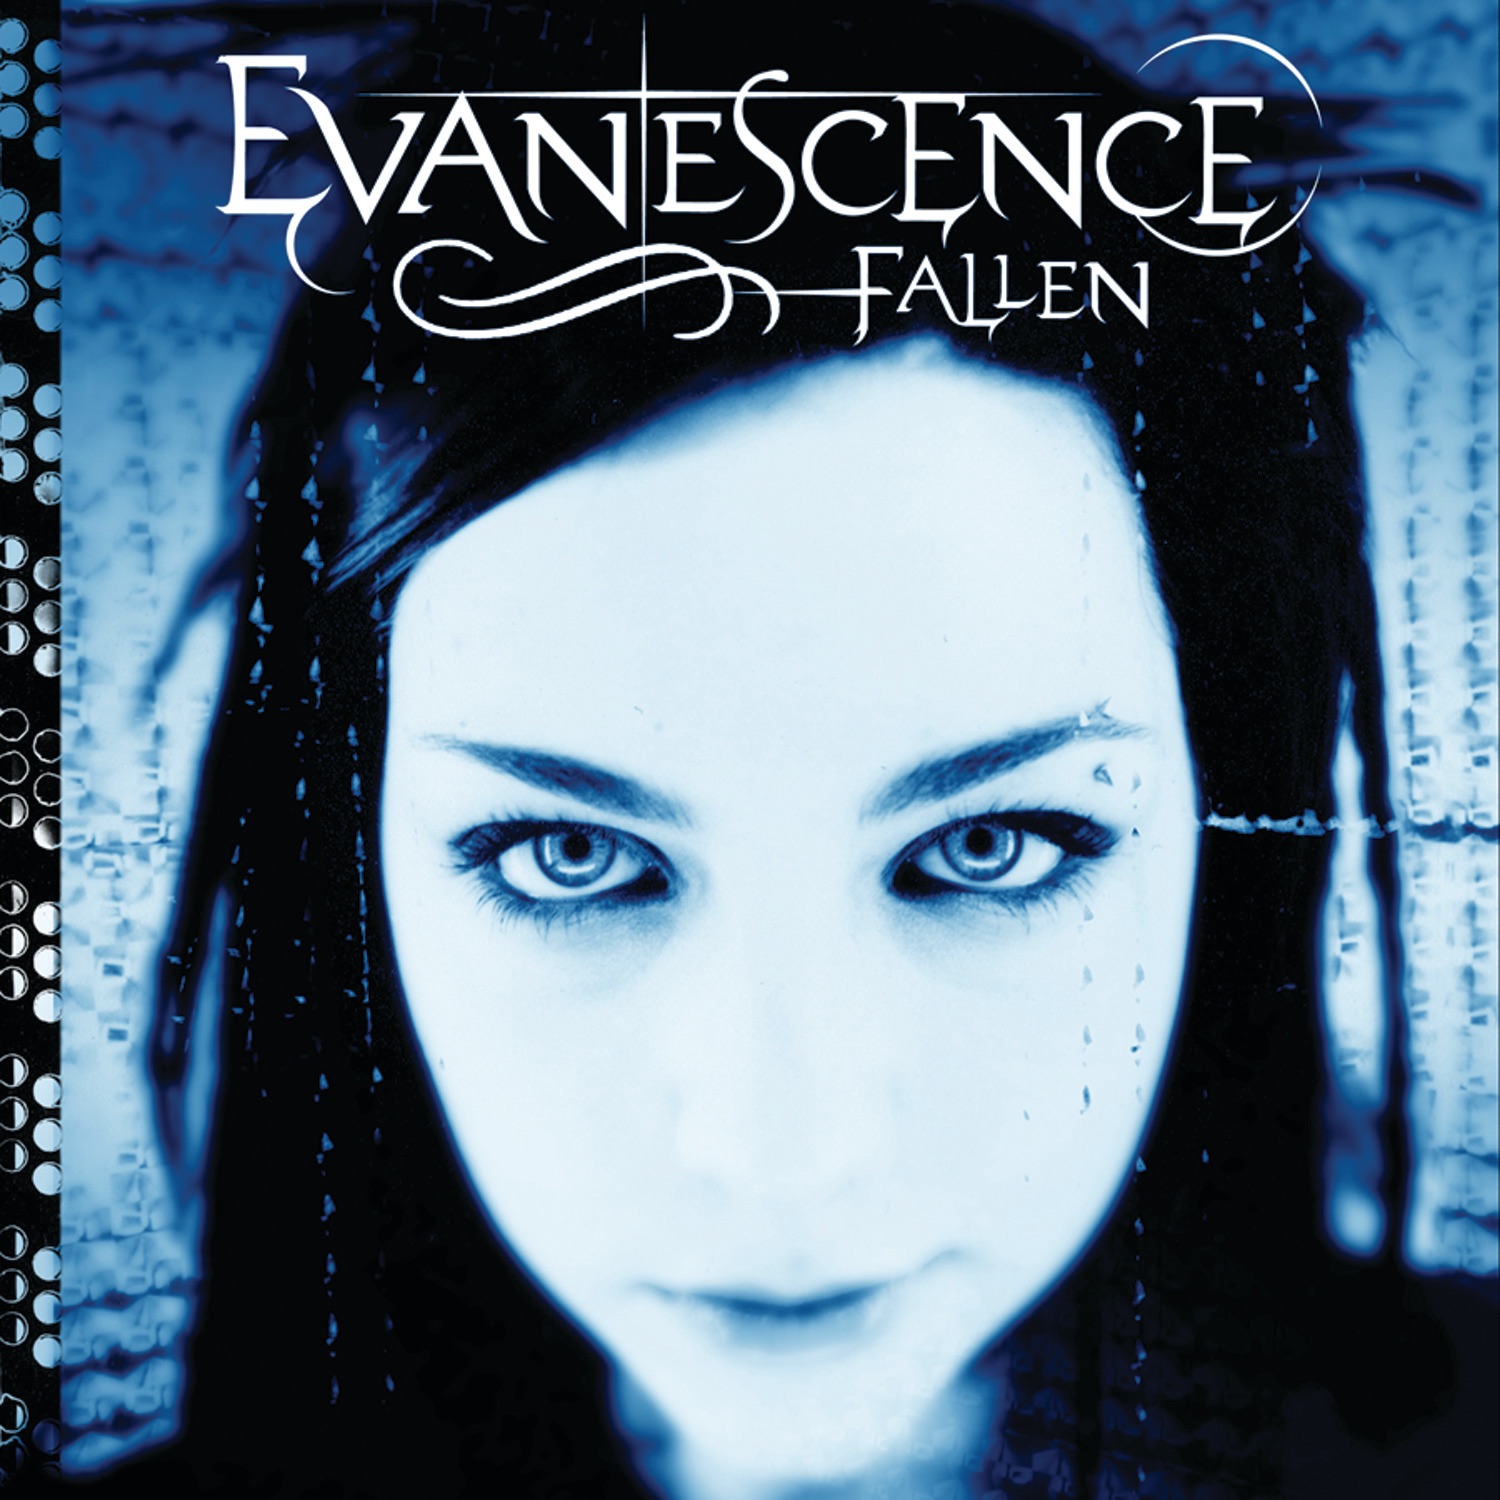 Art for Bring Me to Life by Evanescence